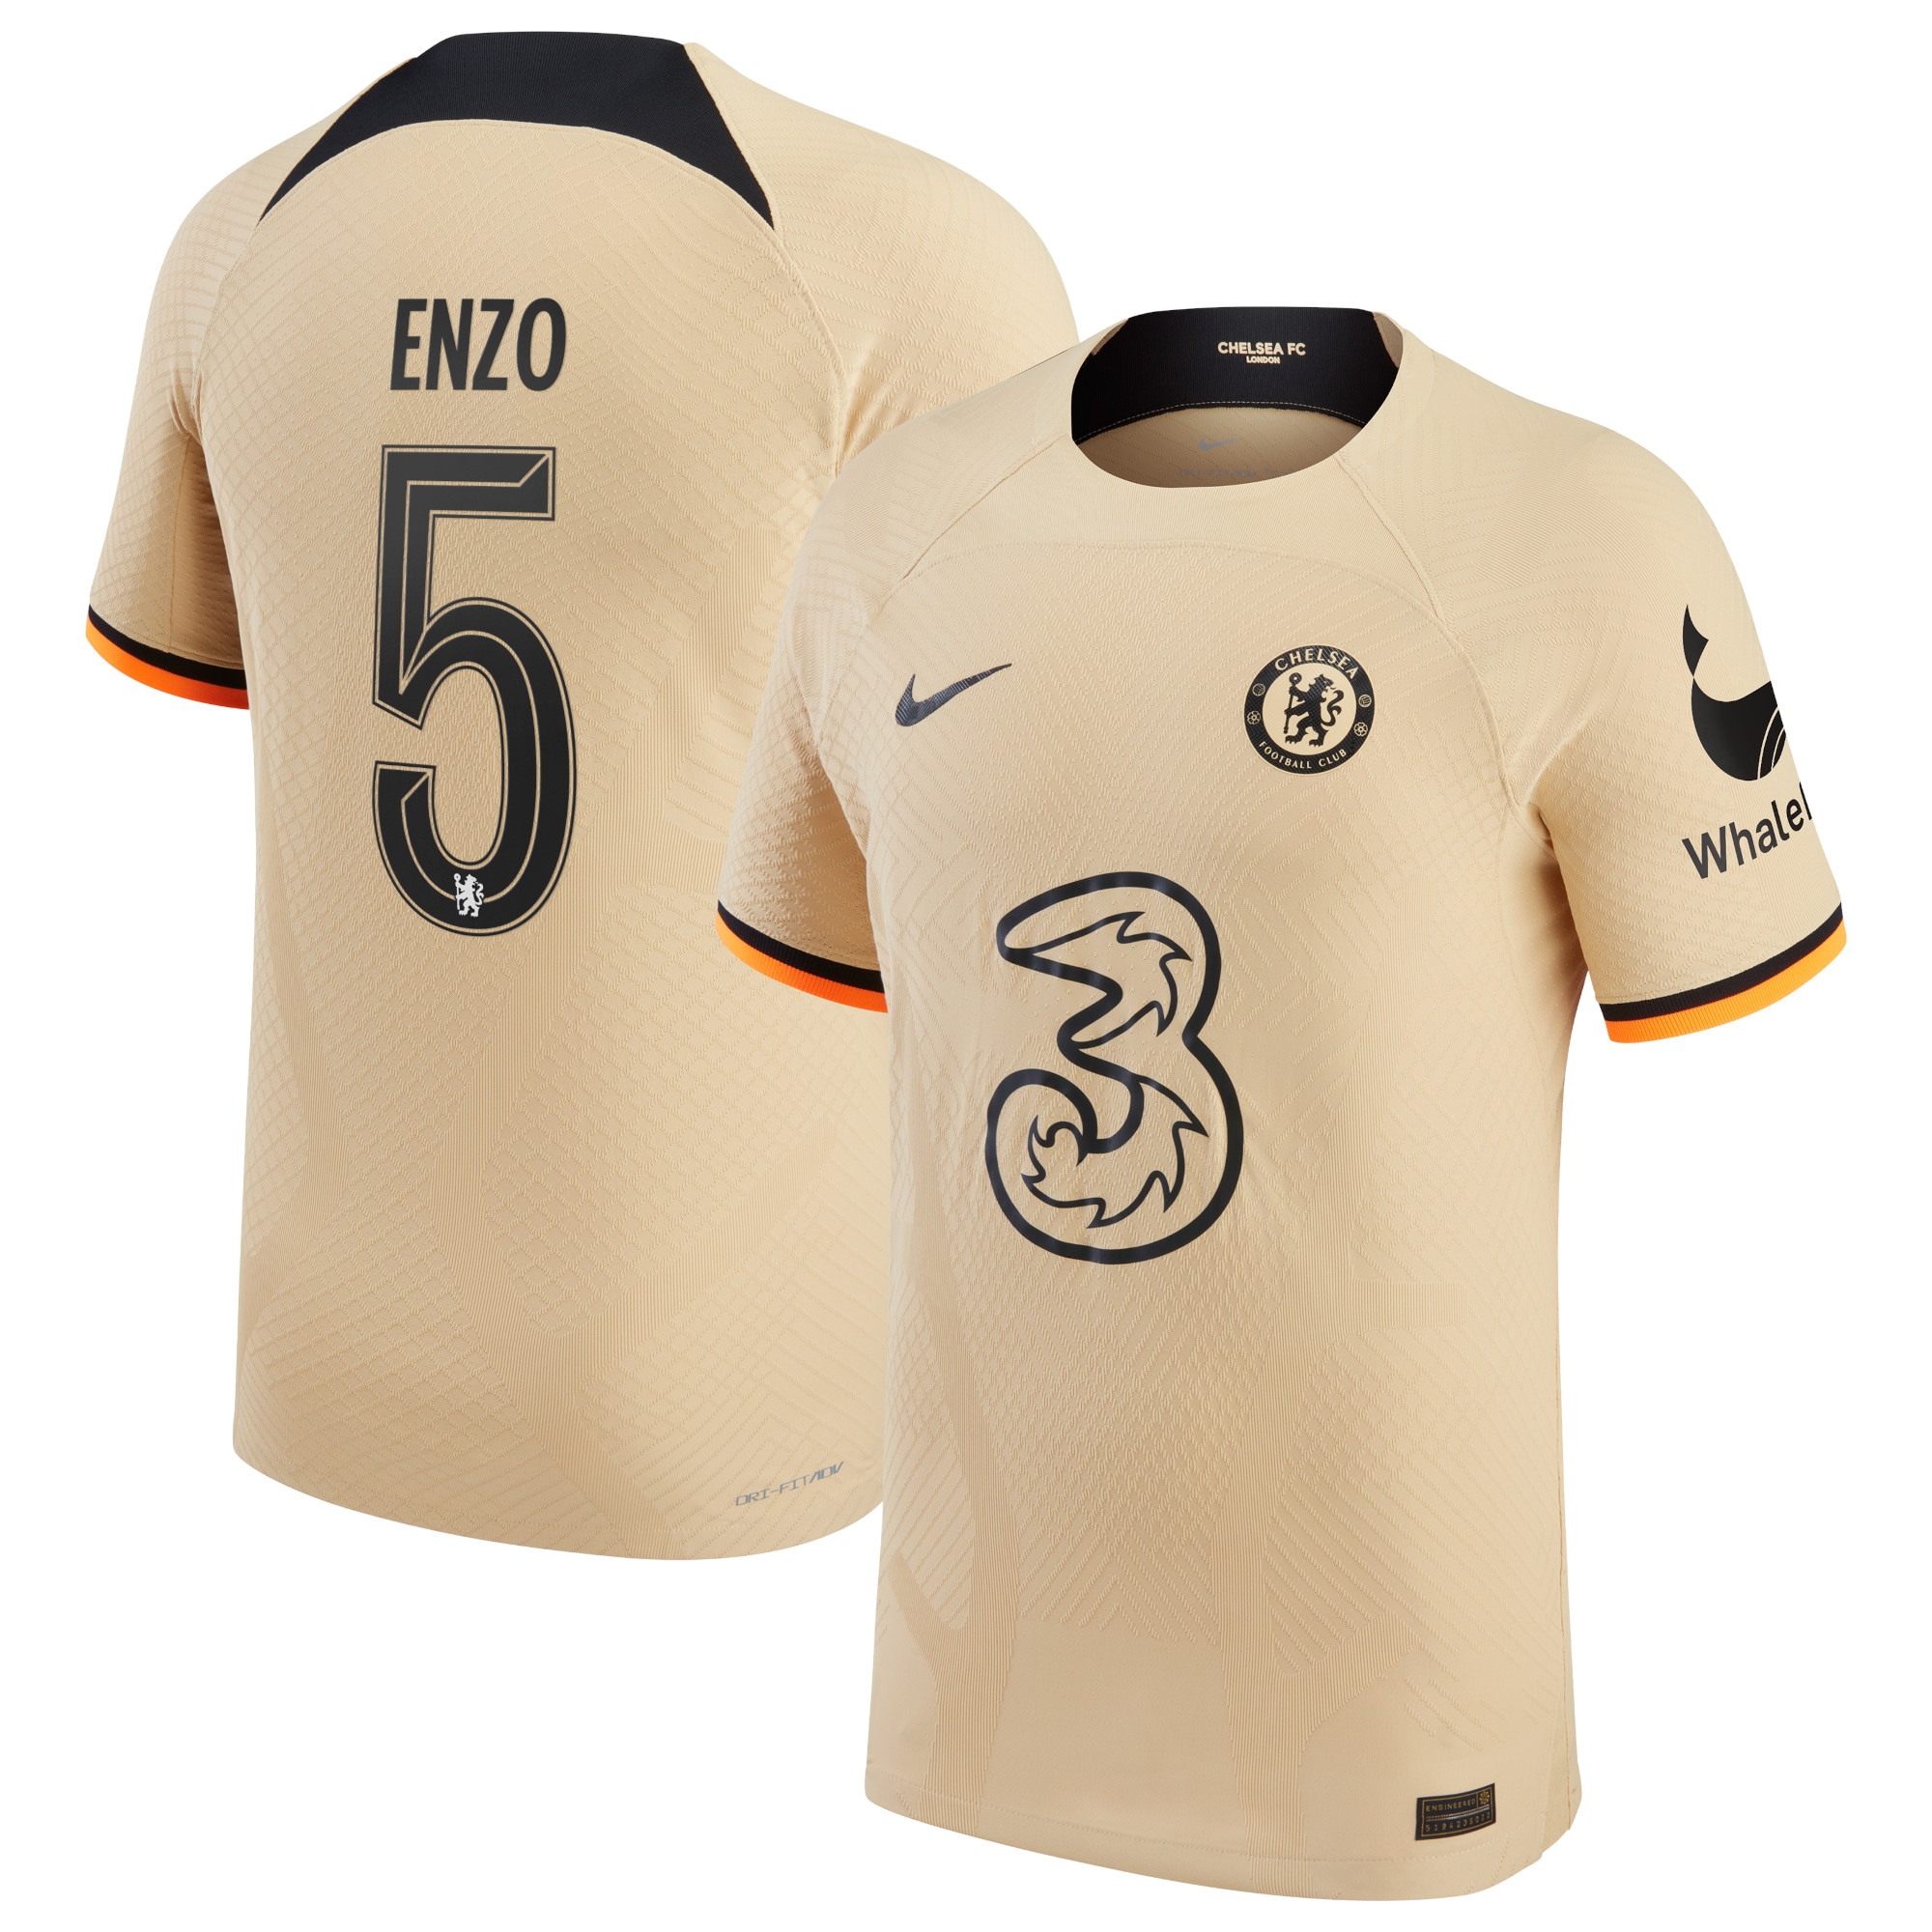 Chelsea Cup Third Vapor Match Shirt 2022-23 with Enzo 5 printing